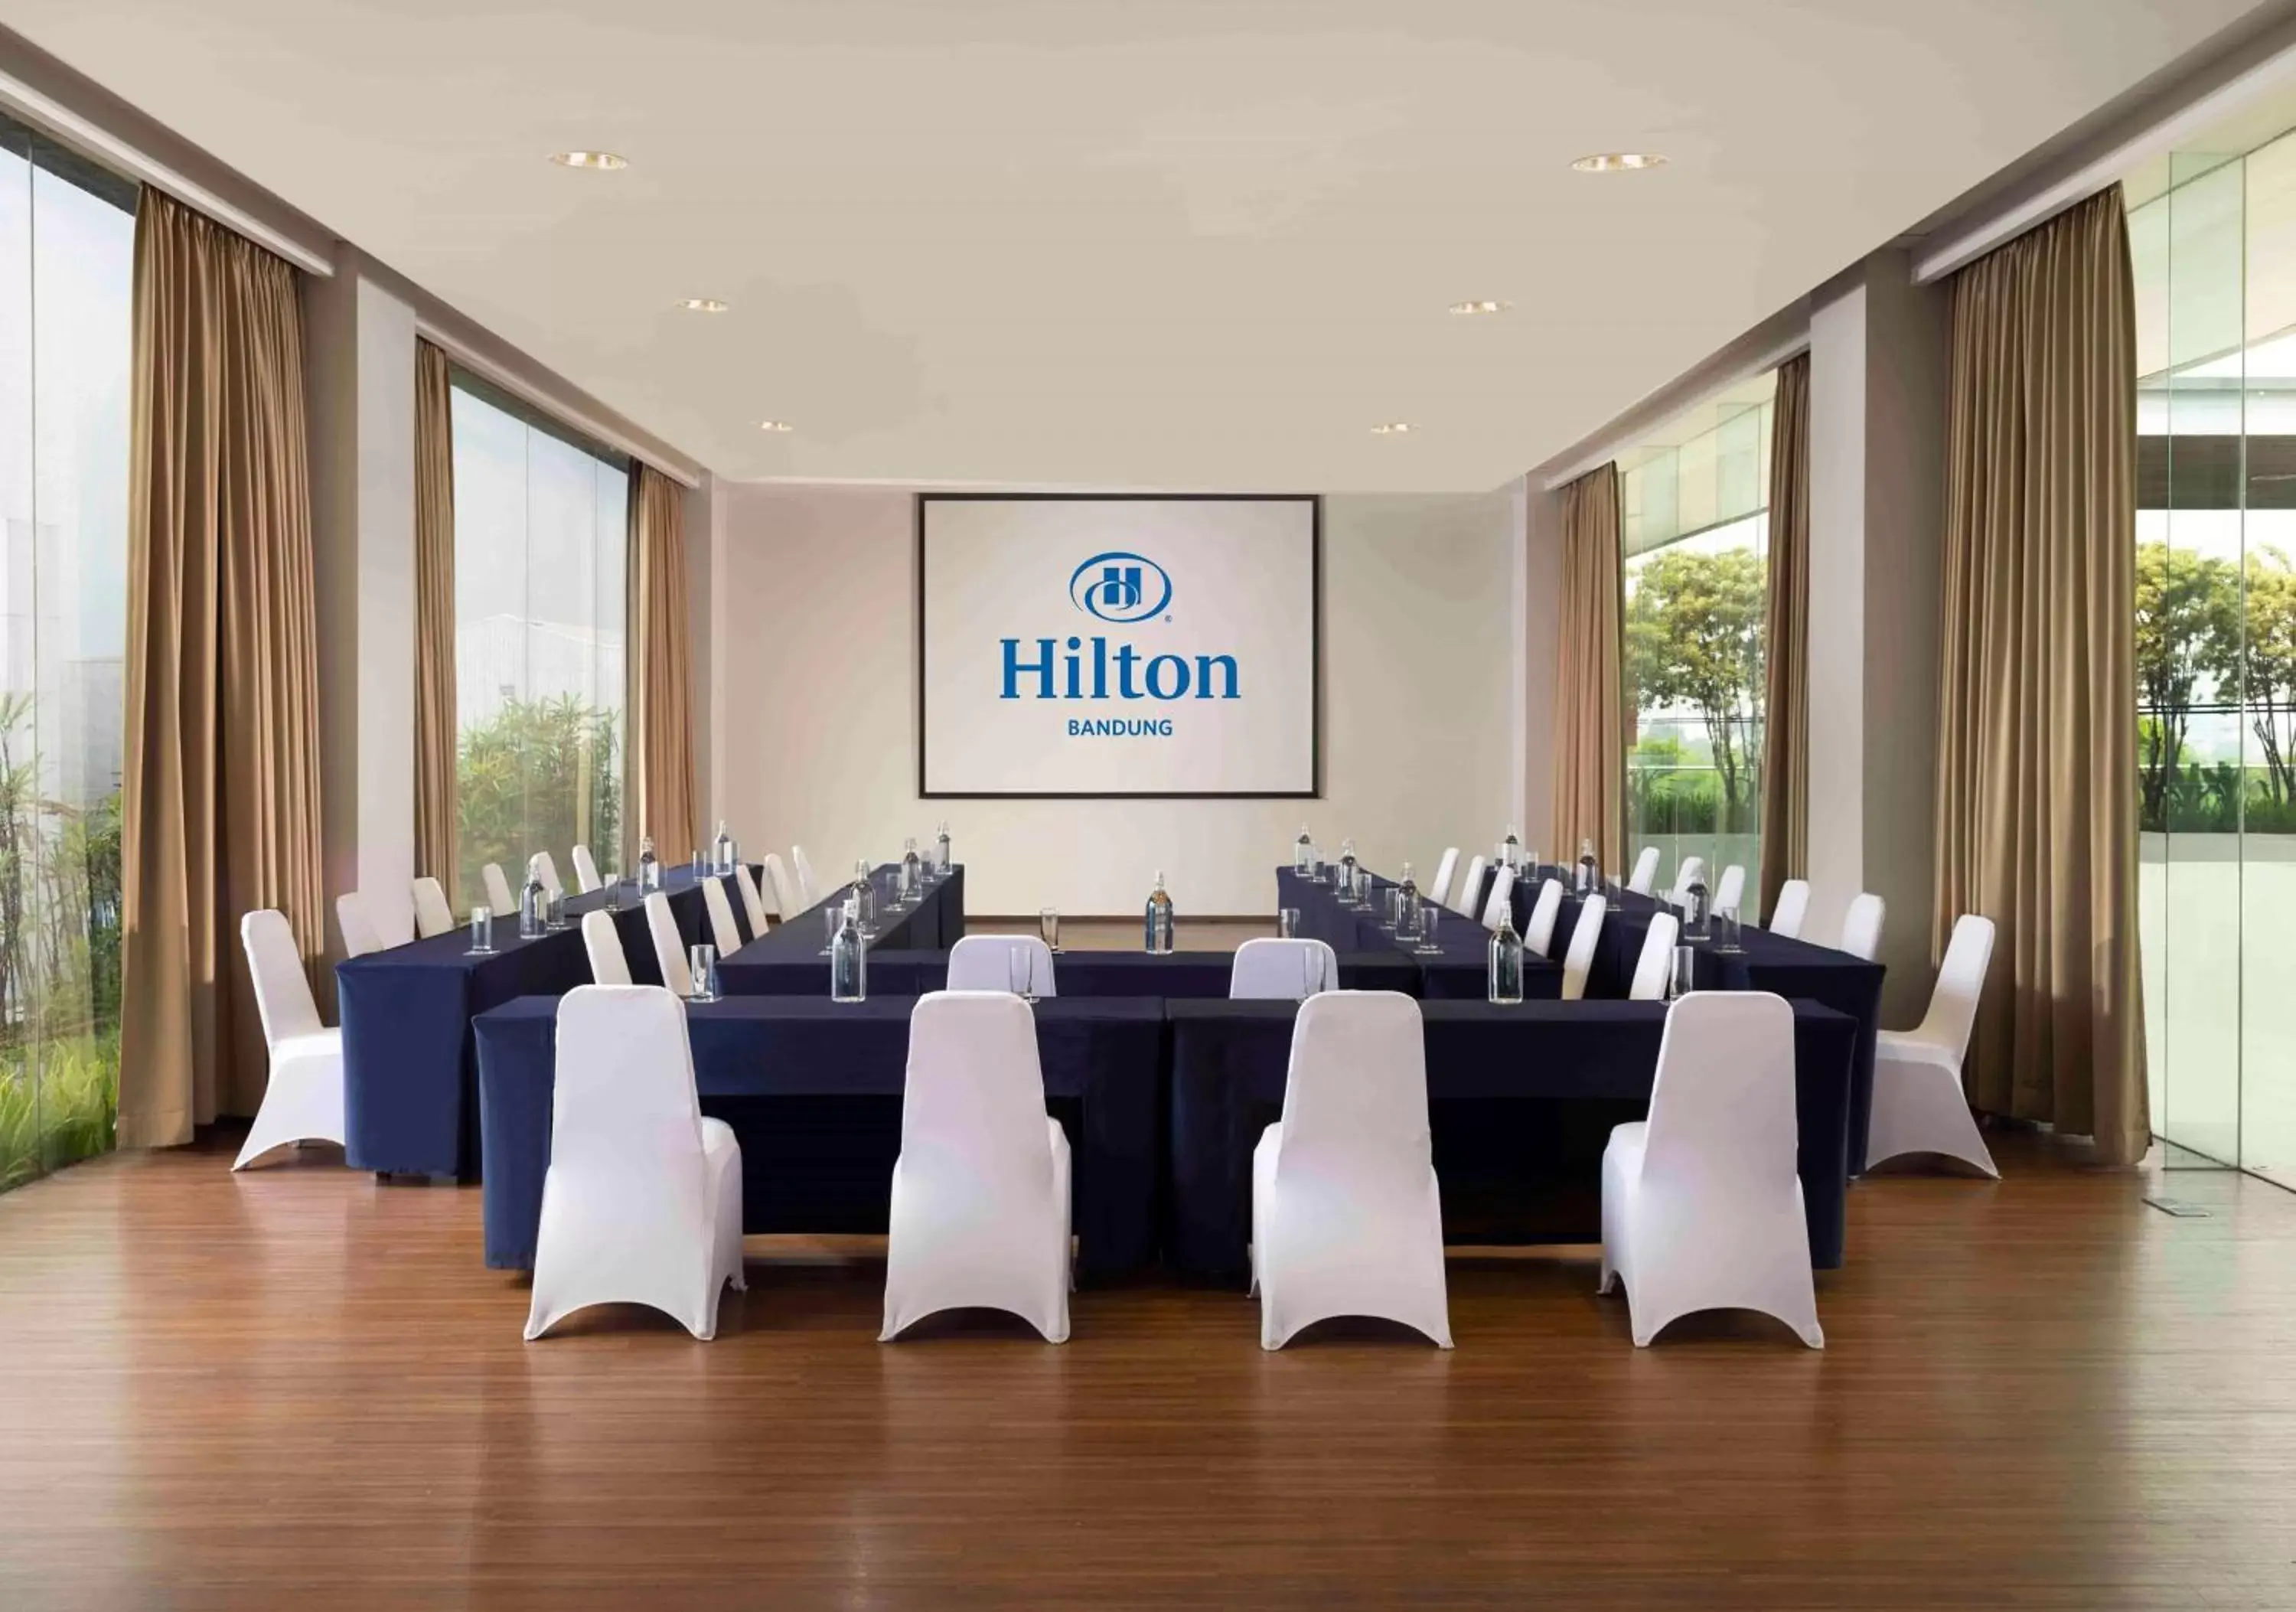 Meeting/conference room in Hilton Bandung